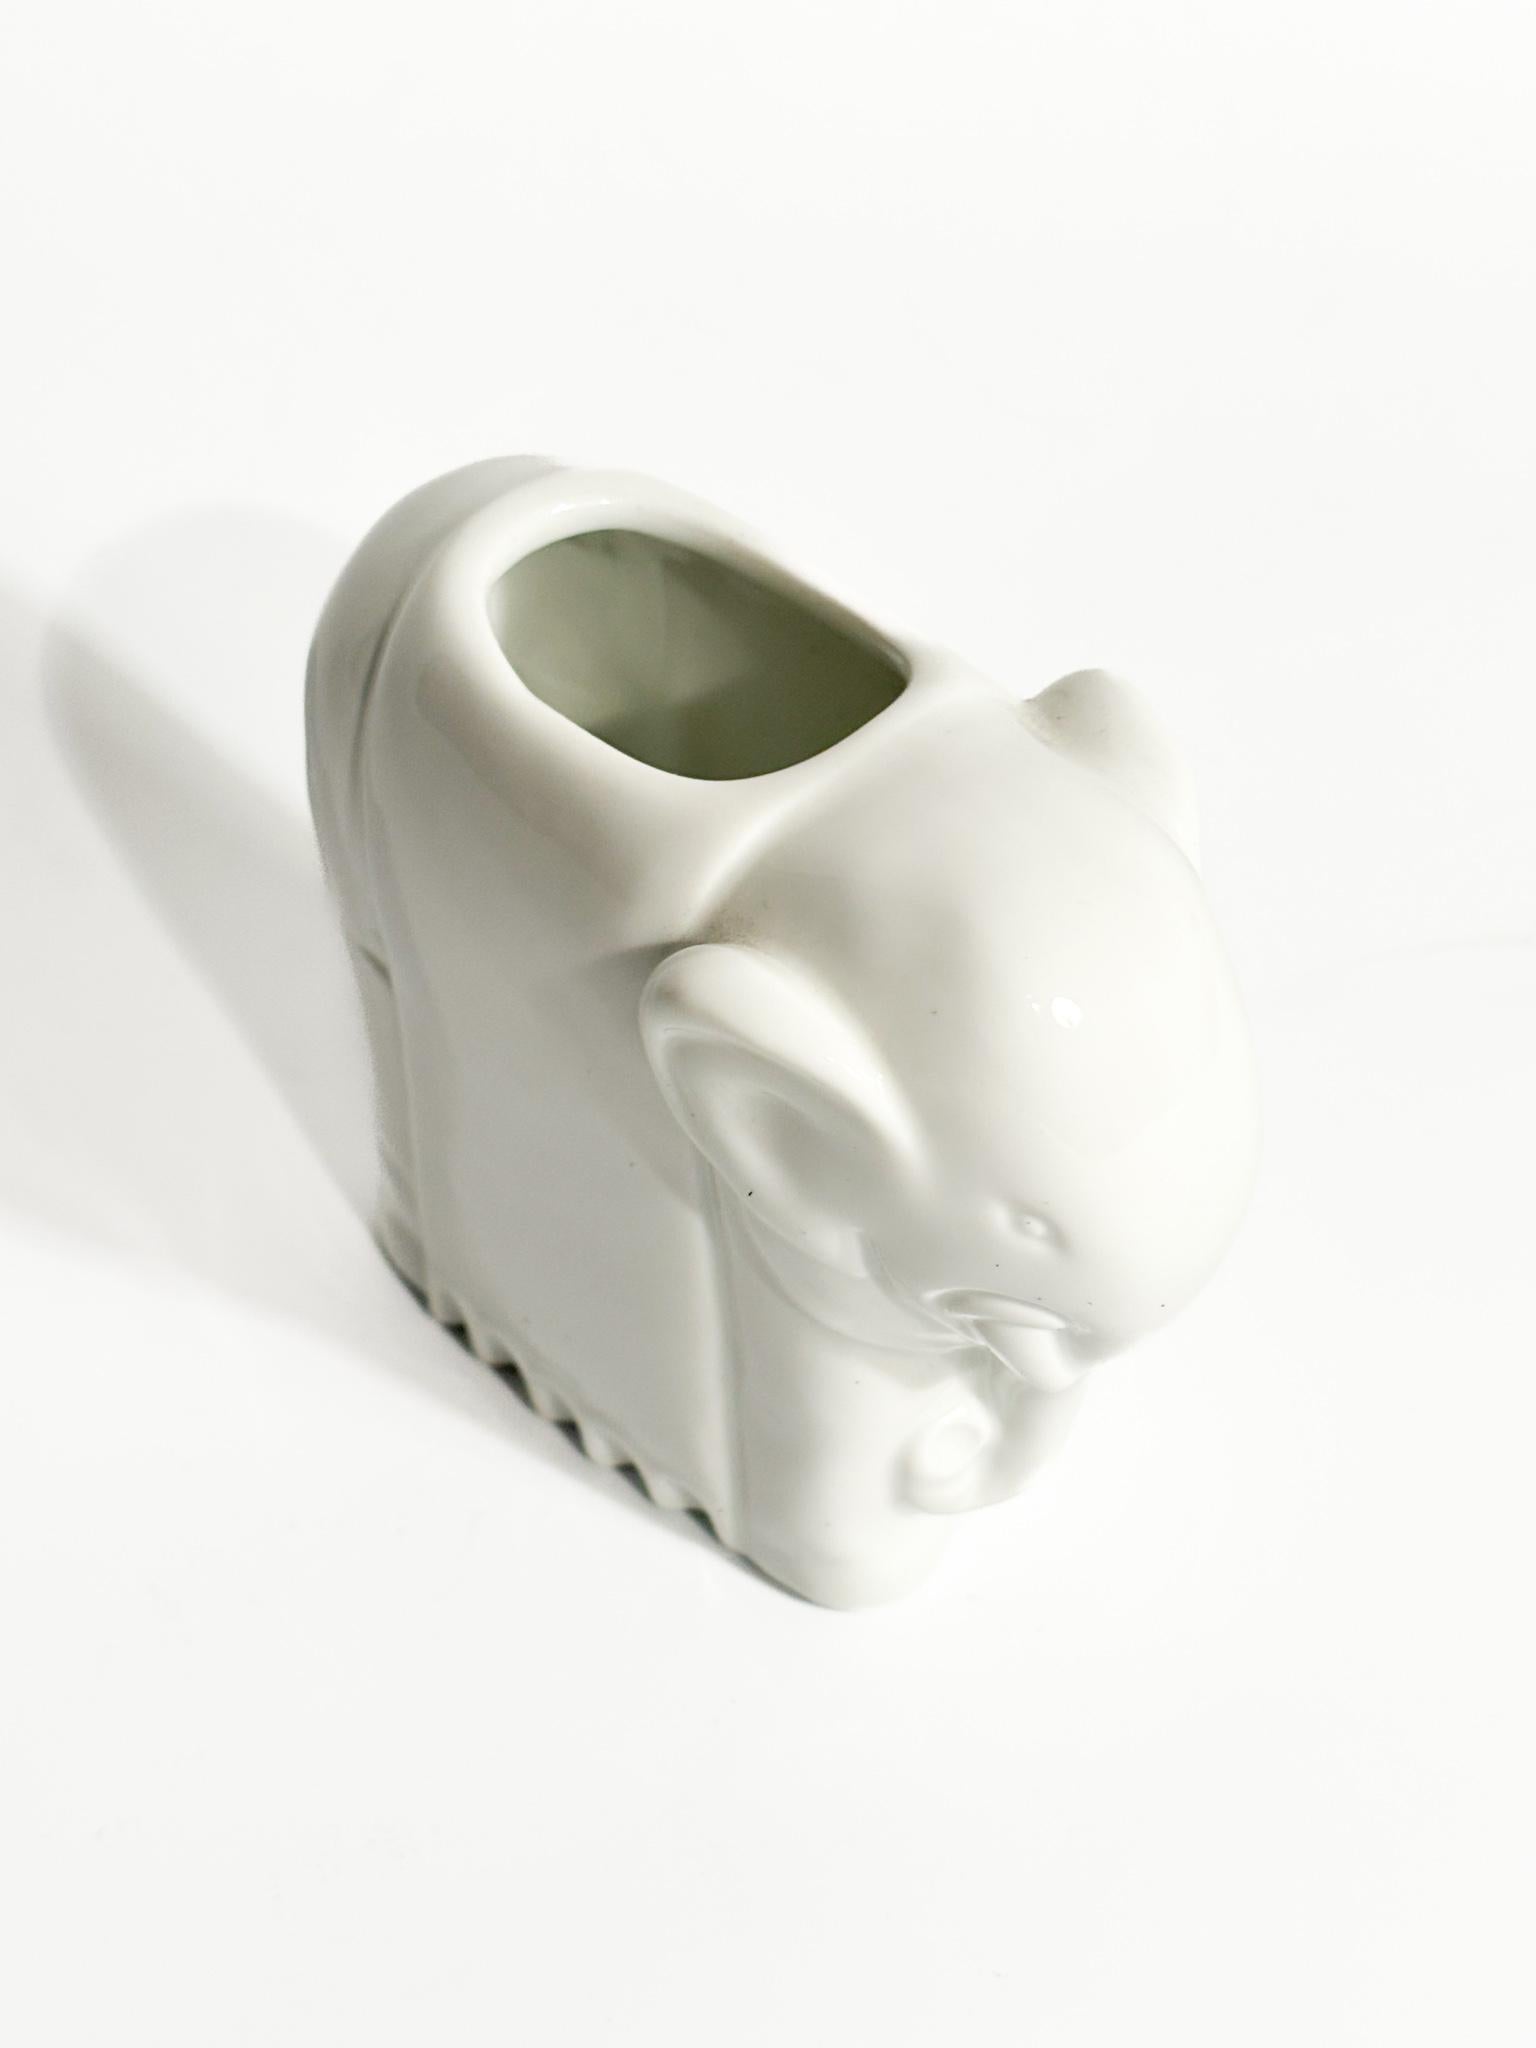 White Elephant Vase Re-edition by Gio Ponti for Richard Ginori 1980s In Good Condition For Sale In Milano, MI